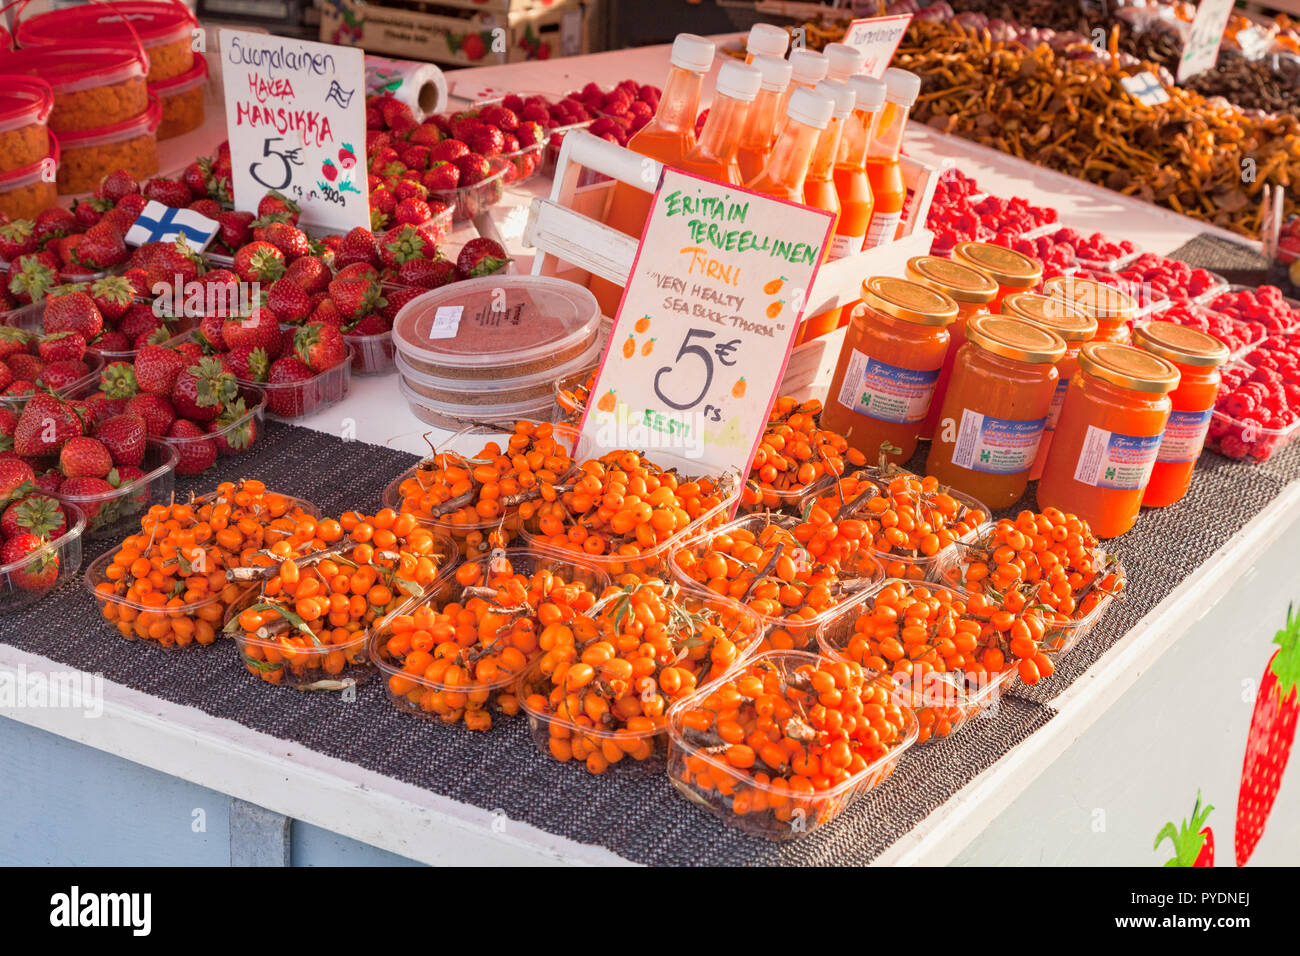 20 September 2018: Helsinki, Finland - Sea Buckthorn berries for sale at a farmer's market in the Market Square on the waterfront. Stock Photo